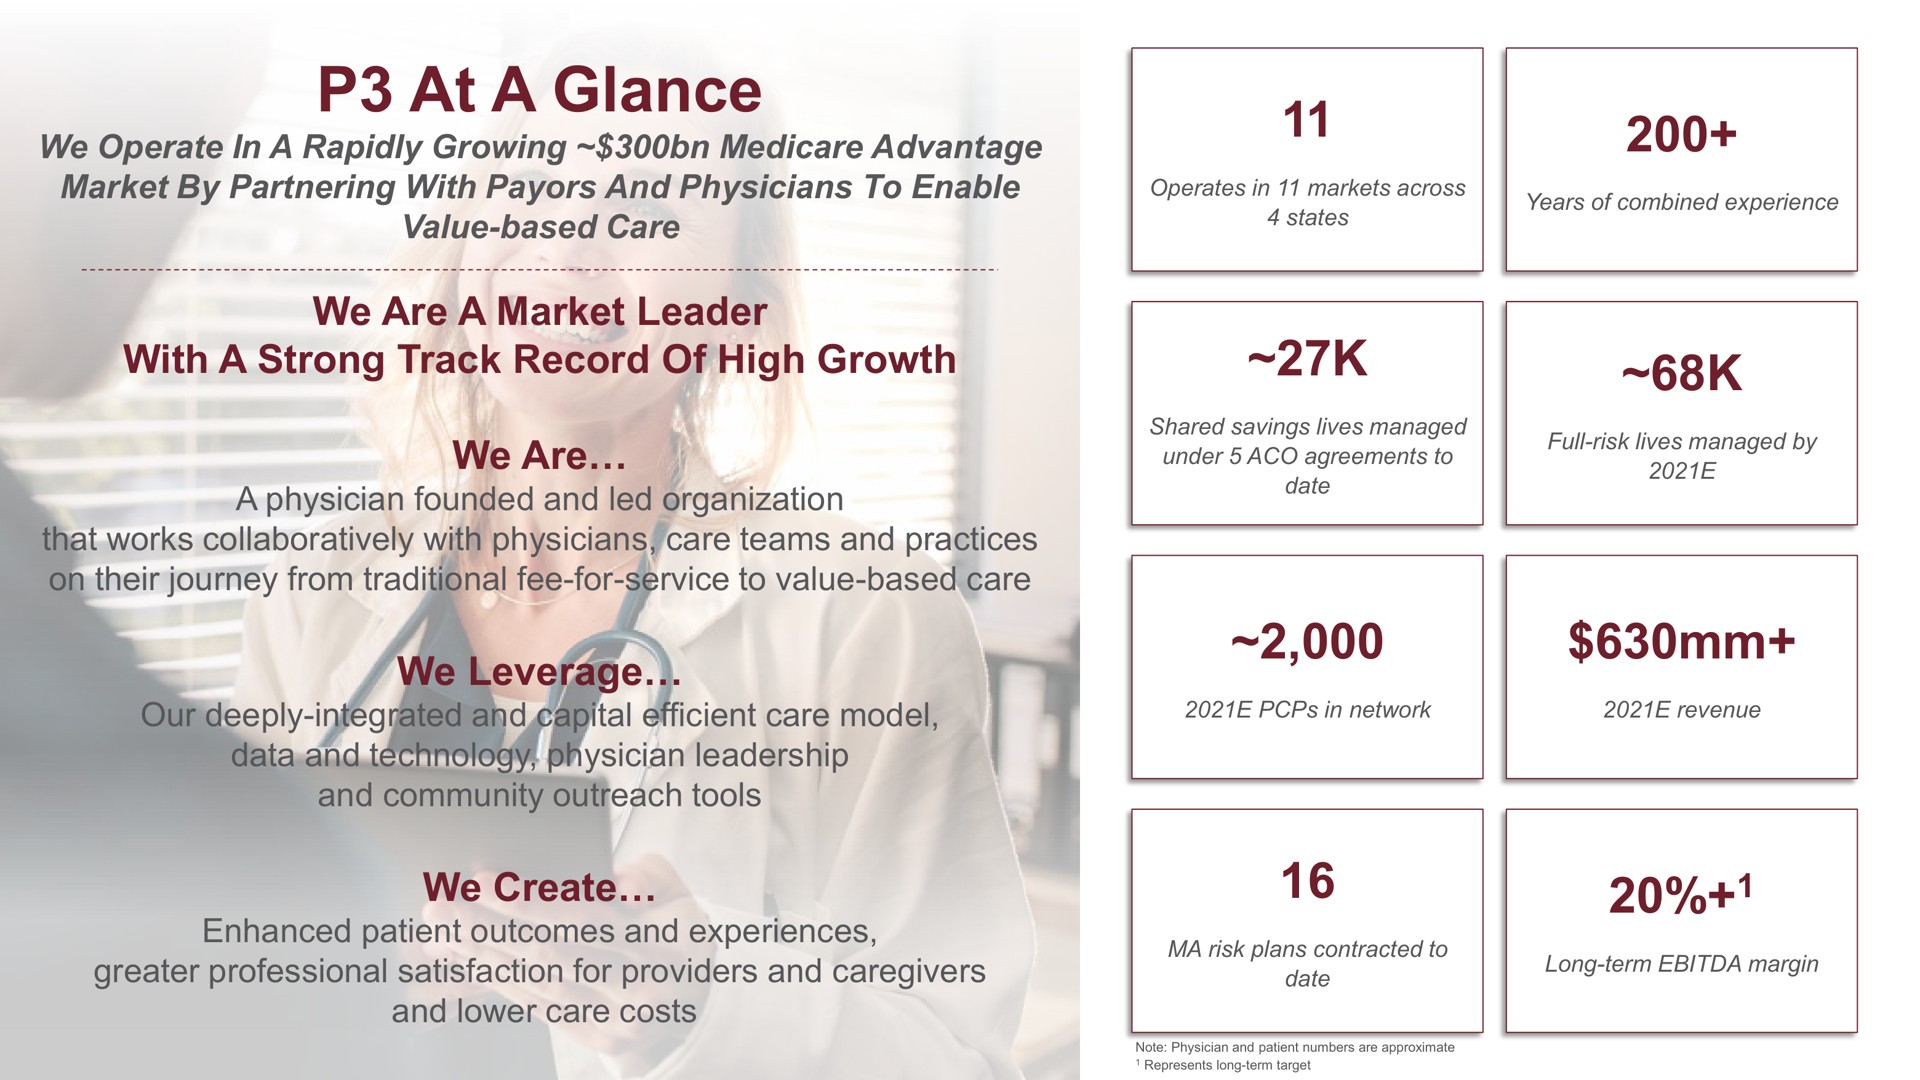 at a glance we operate in a rapidly growing advantage market by partnering with and physicians to enable value based care we are a market leader with a strong track record of high growth we are a physician founded and led organization that works collaboratively with physicians care teams and practices on their journey from traditional fee for service to value based care we leverage our deeply integrated and capital efficient care model data and technology physician leadership and community outreach tools we create enhanced patient outcomes and experiences greater professional satisfaction for providers and and lower care costs if | P3 Health Partners